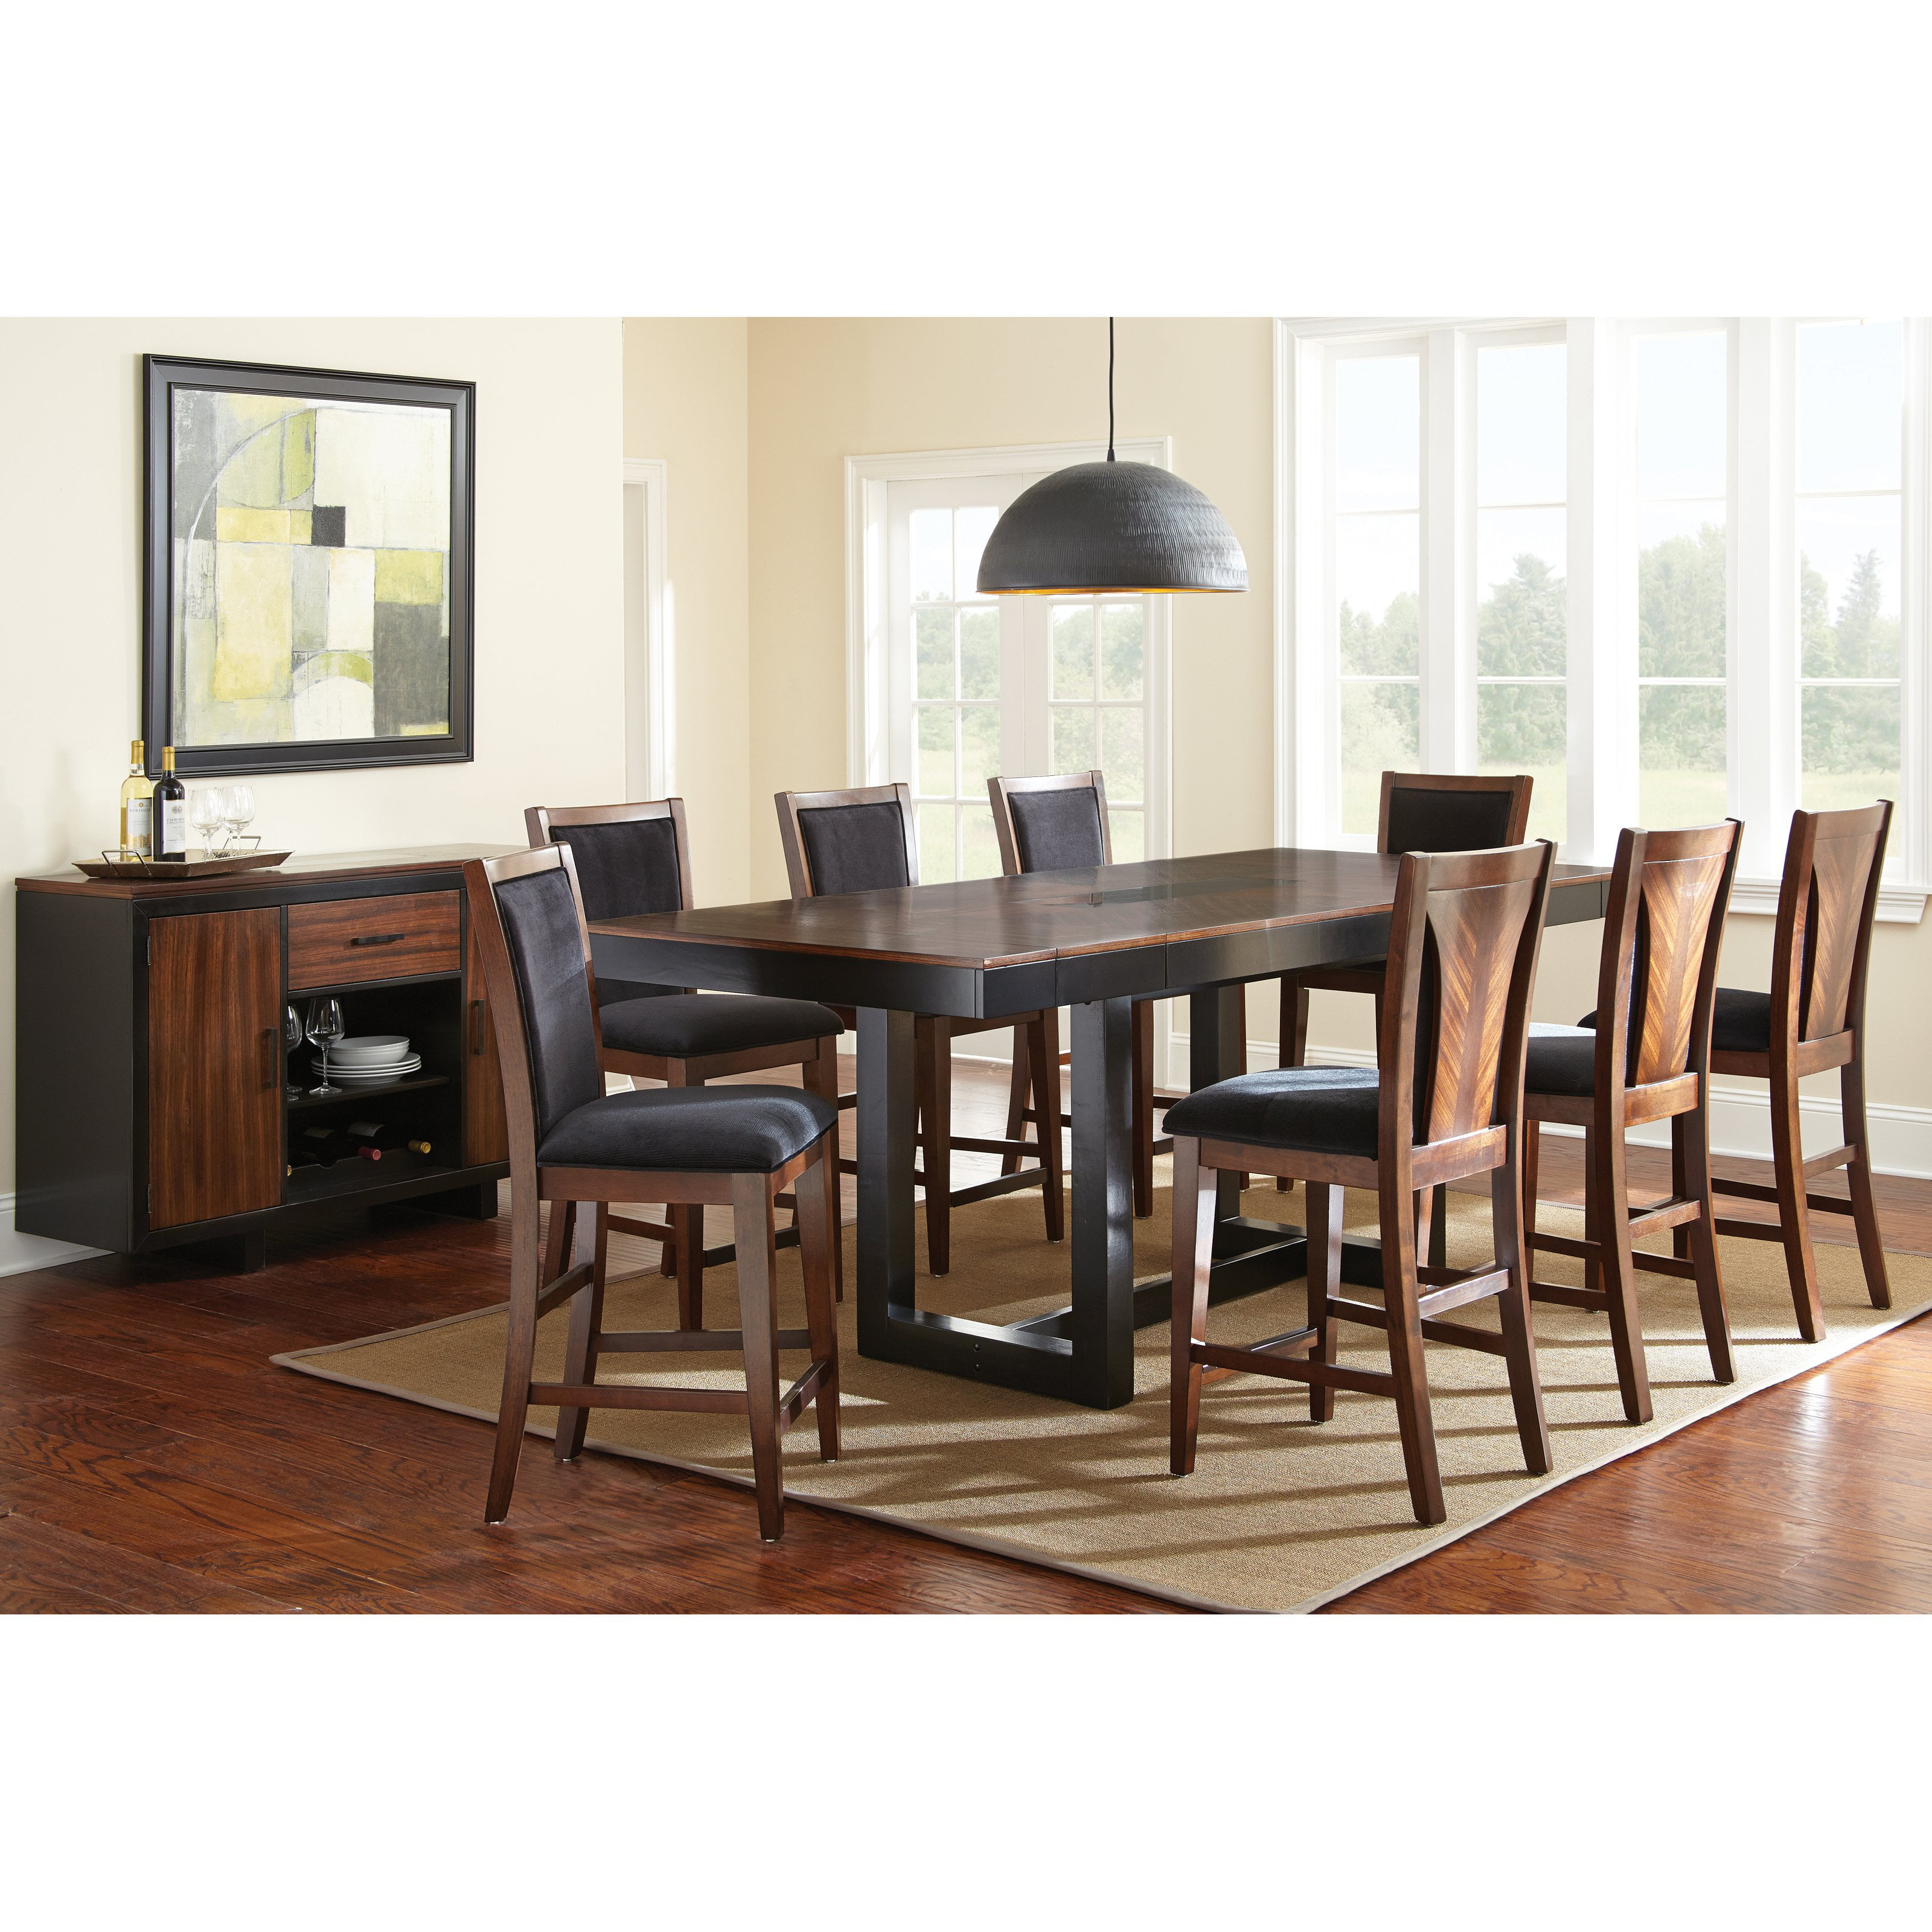 Steve Silver Julian 9 Piece Counter Height Dining Table Set With